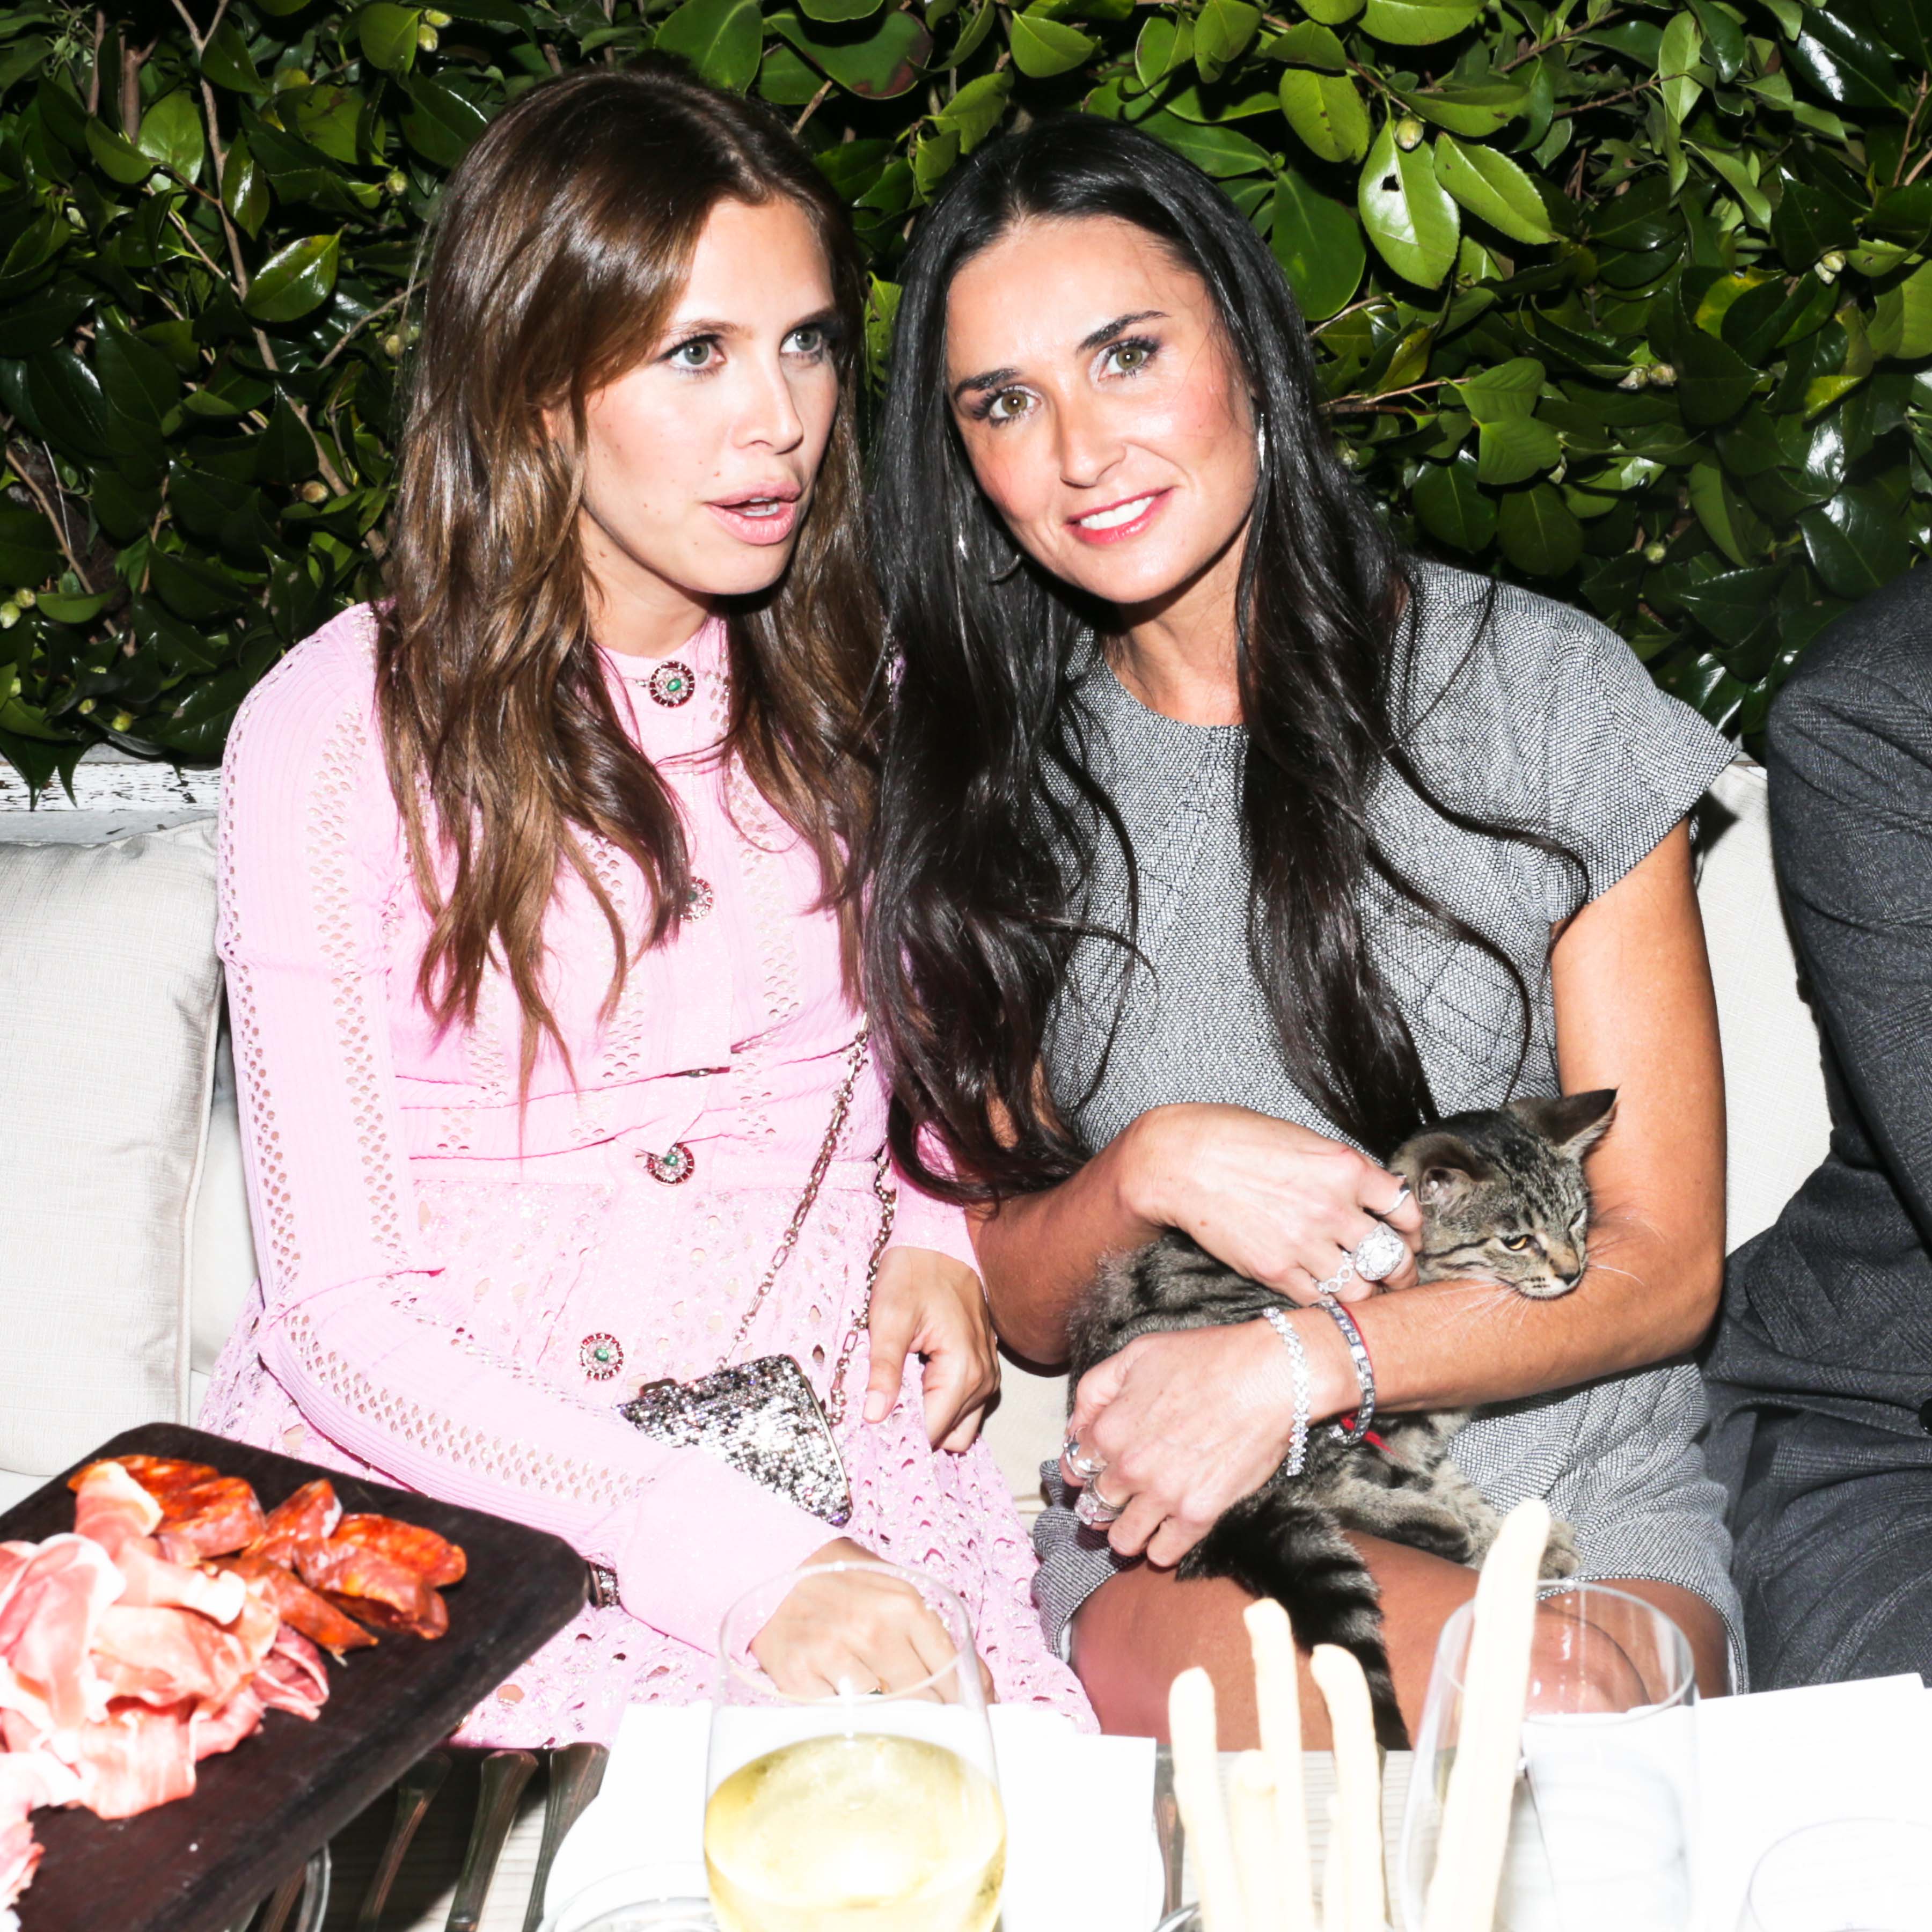 CHANEL Hosts a Dinner and Auction to Benefit the Henry Street Settlement